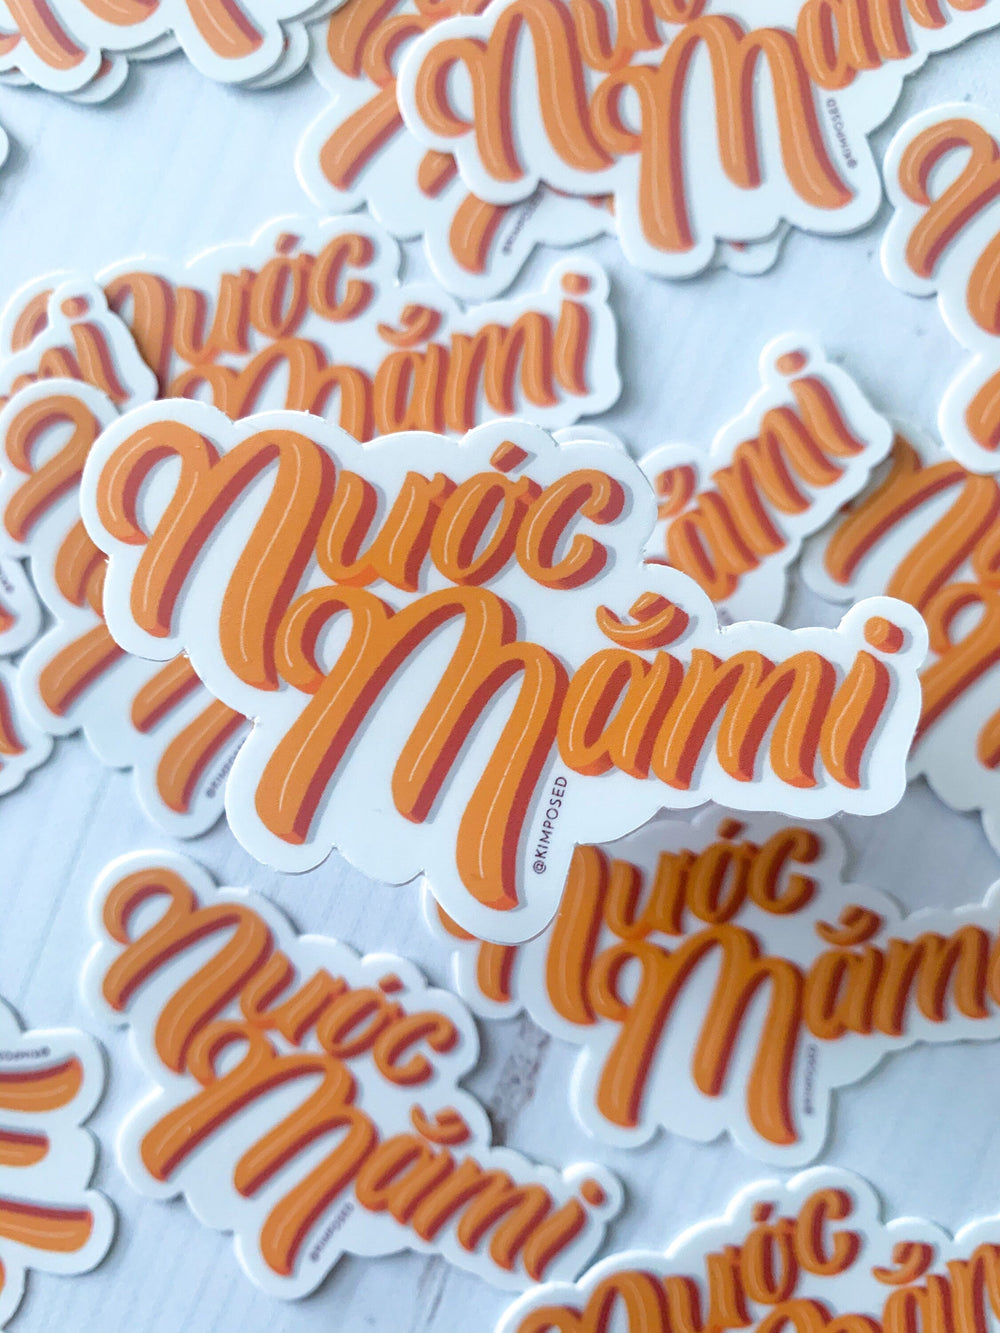 Nuoc Mami 3" Waterproof Vinyl Sticker for Water Bottles, Laptops, Phones & More **FREE USA SHIPPING**